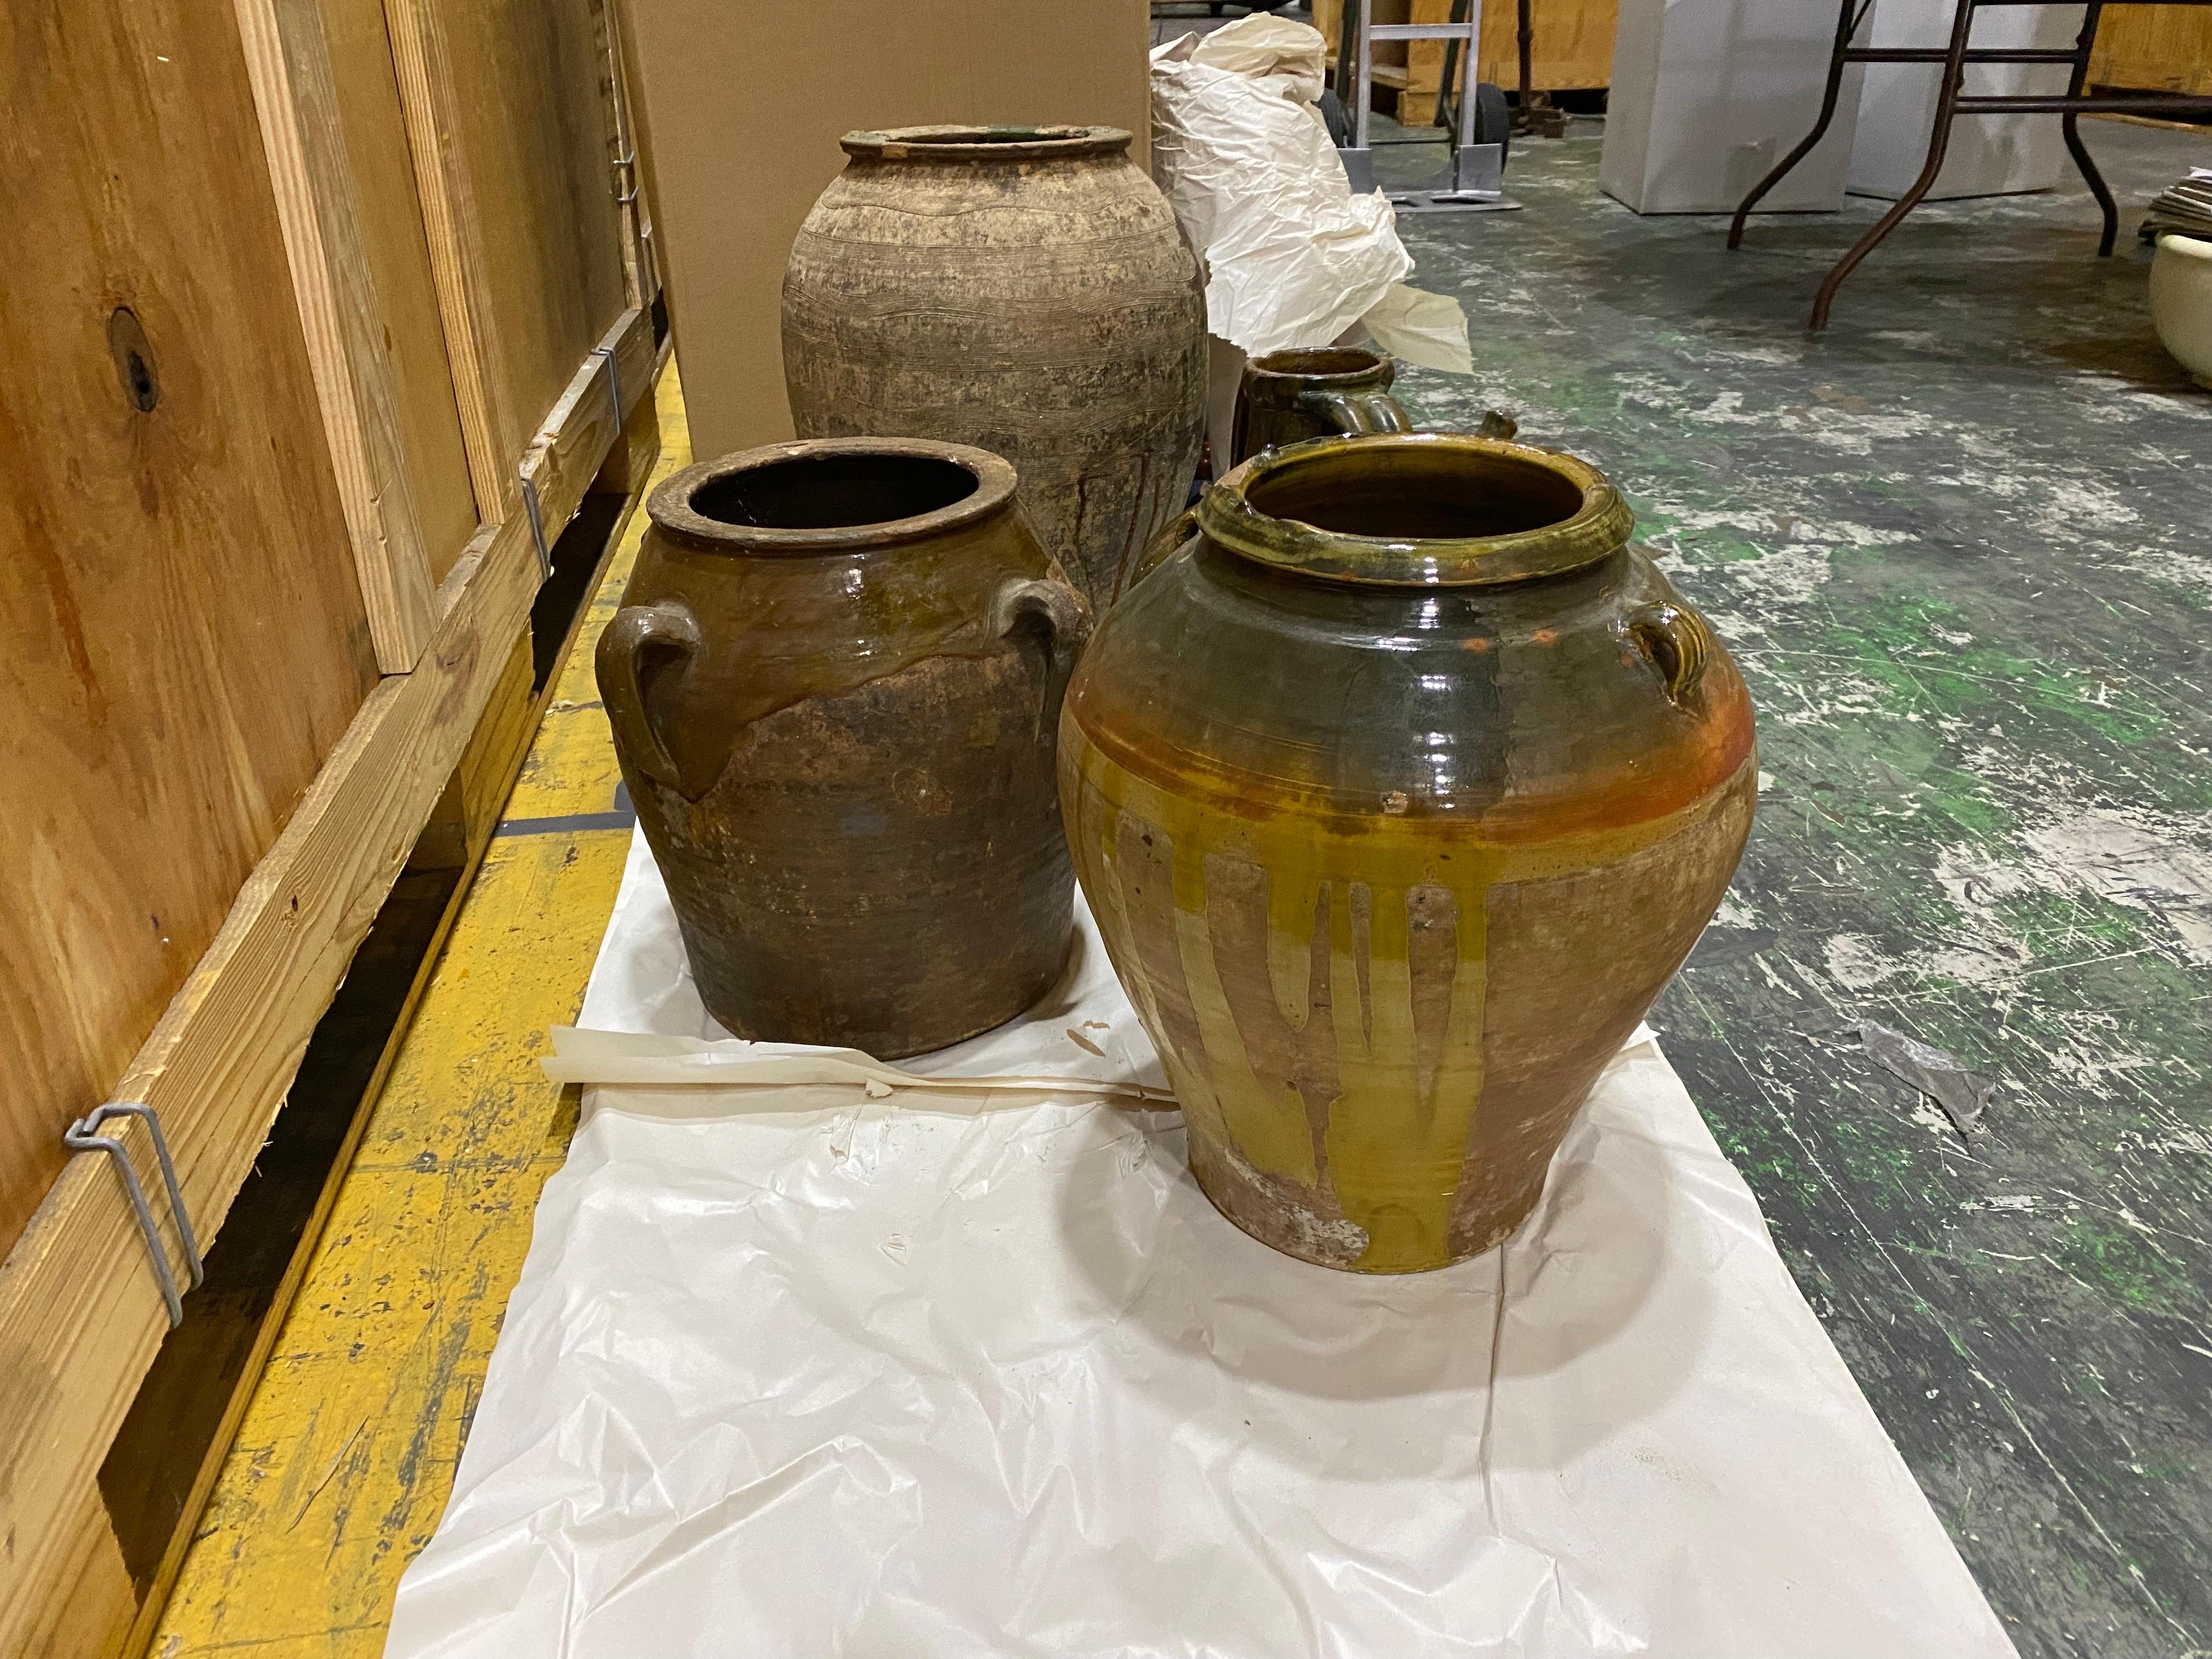 Set of Four French Green & Brown Glazed Terracotta Pots & Jars, 19th Century
Large Green glazed terracotta vessel unglazed with green glaze on the inside and dripped around the tops down the sides. One side principally unglazed. grooved design event